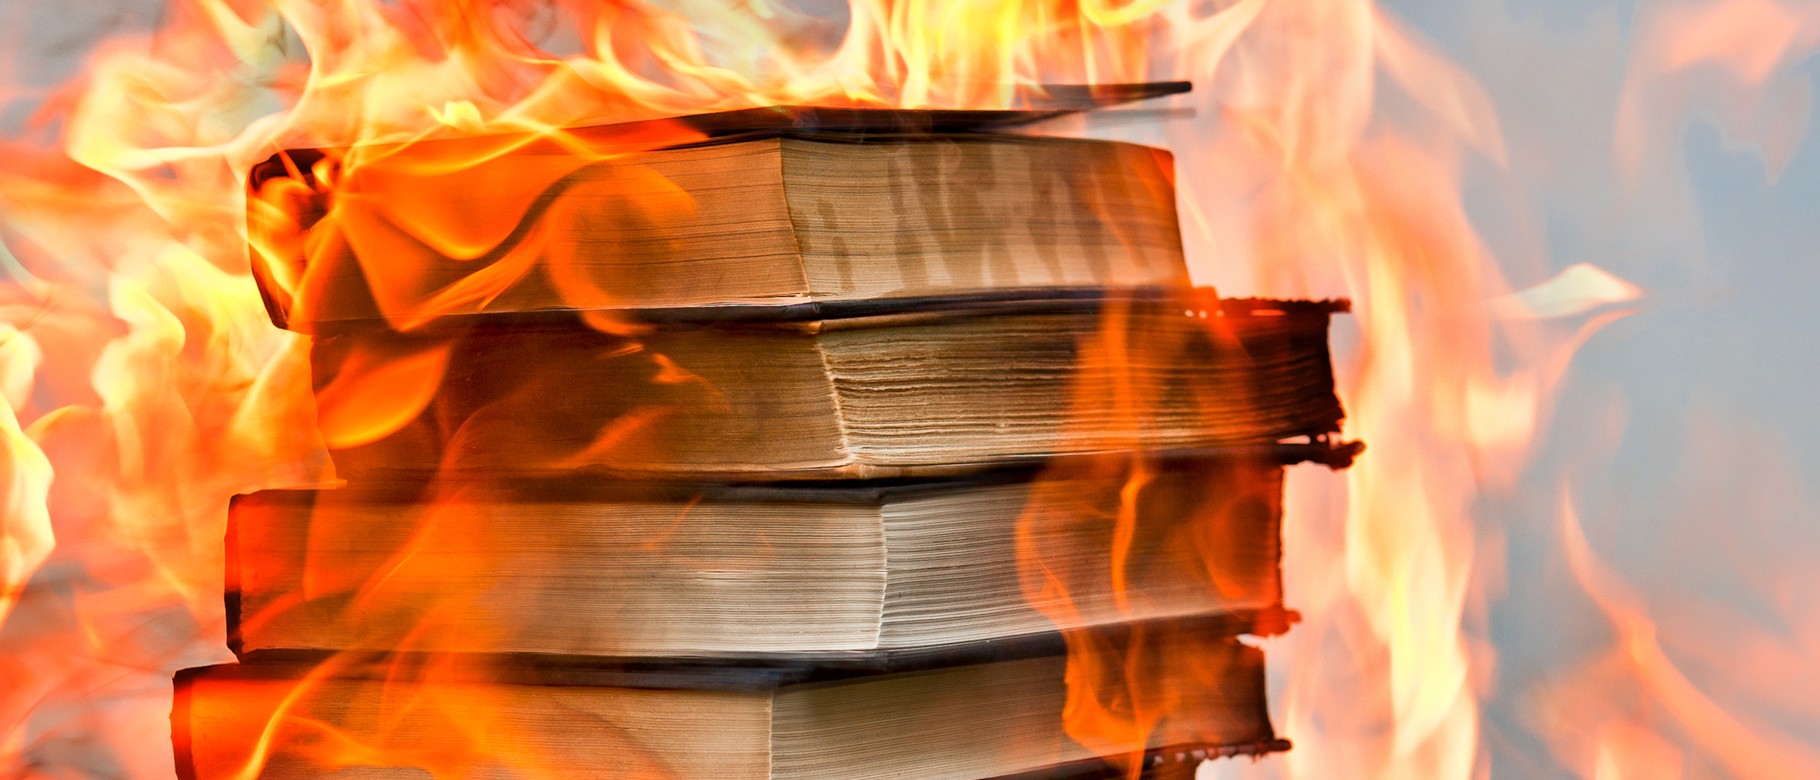 A stack of books on fire